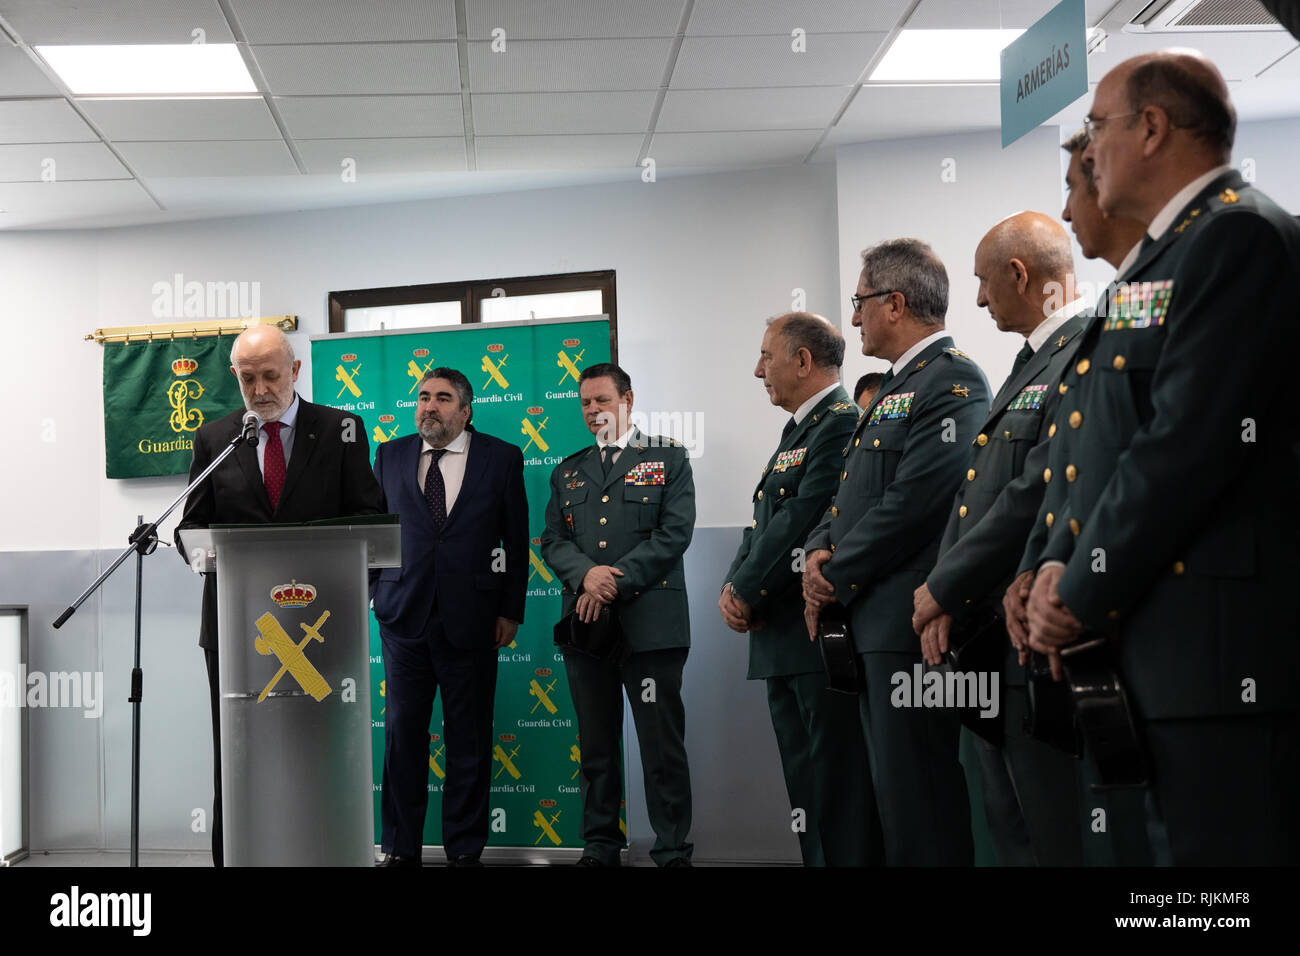 Madrid, Spain. 7th Feb 2019. The general director of the Civil Guard, Félix Azón appears giving a speech to the staff of the dependencies Credit: Jesús Hellin/Alamy Live News Stock Photo